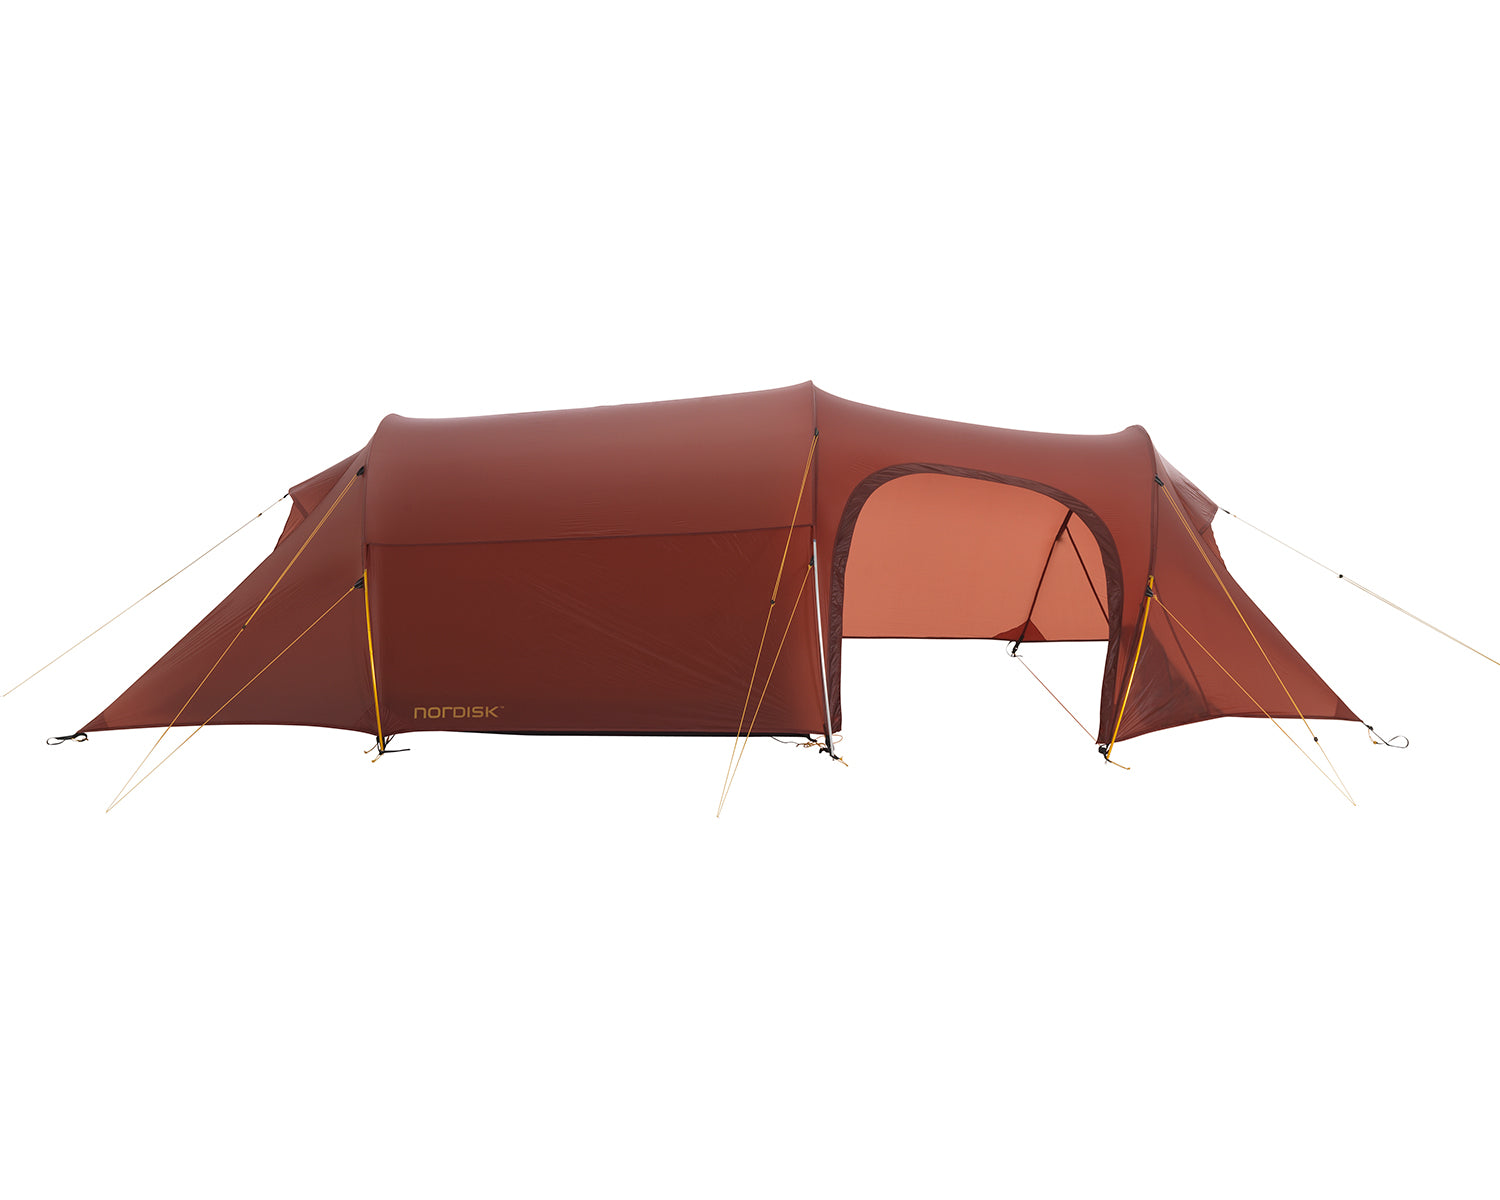 Oppland 3 LW tent - 3 person - Burnt Red